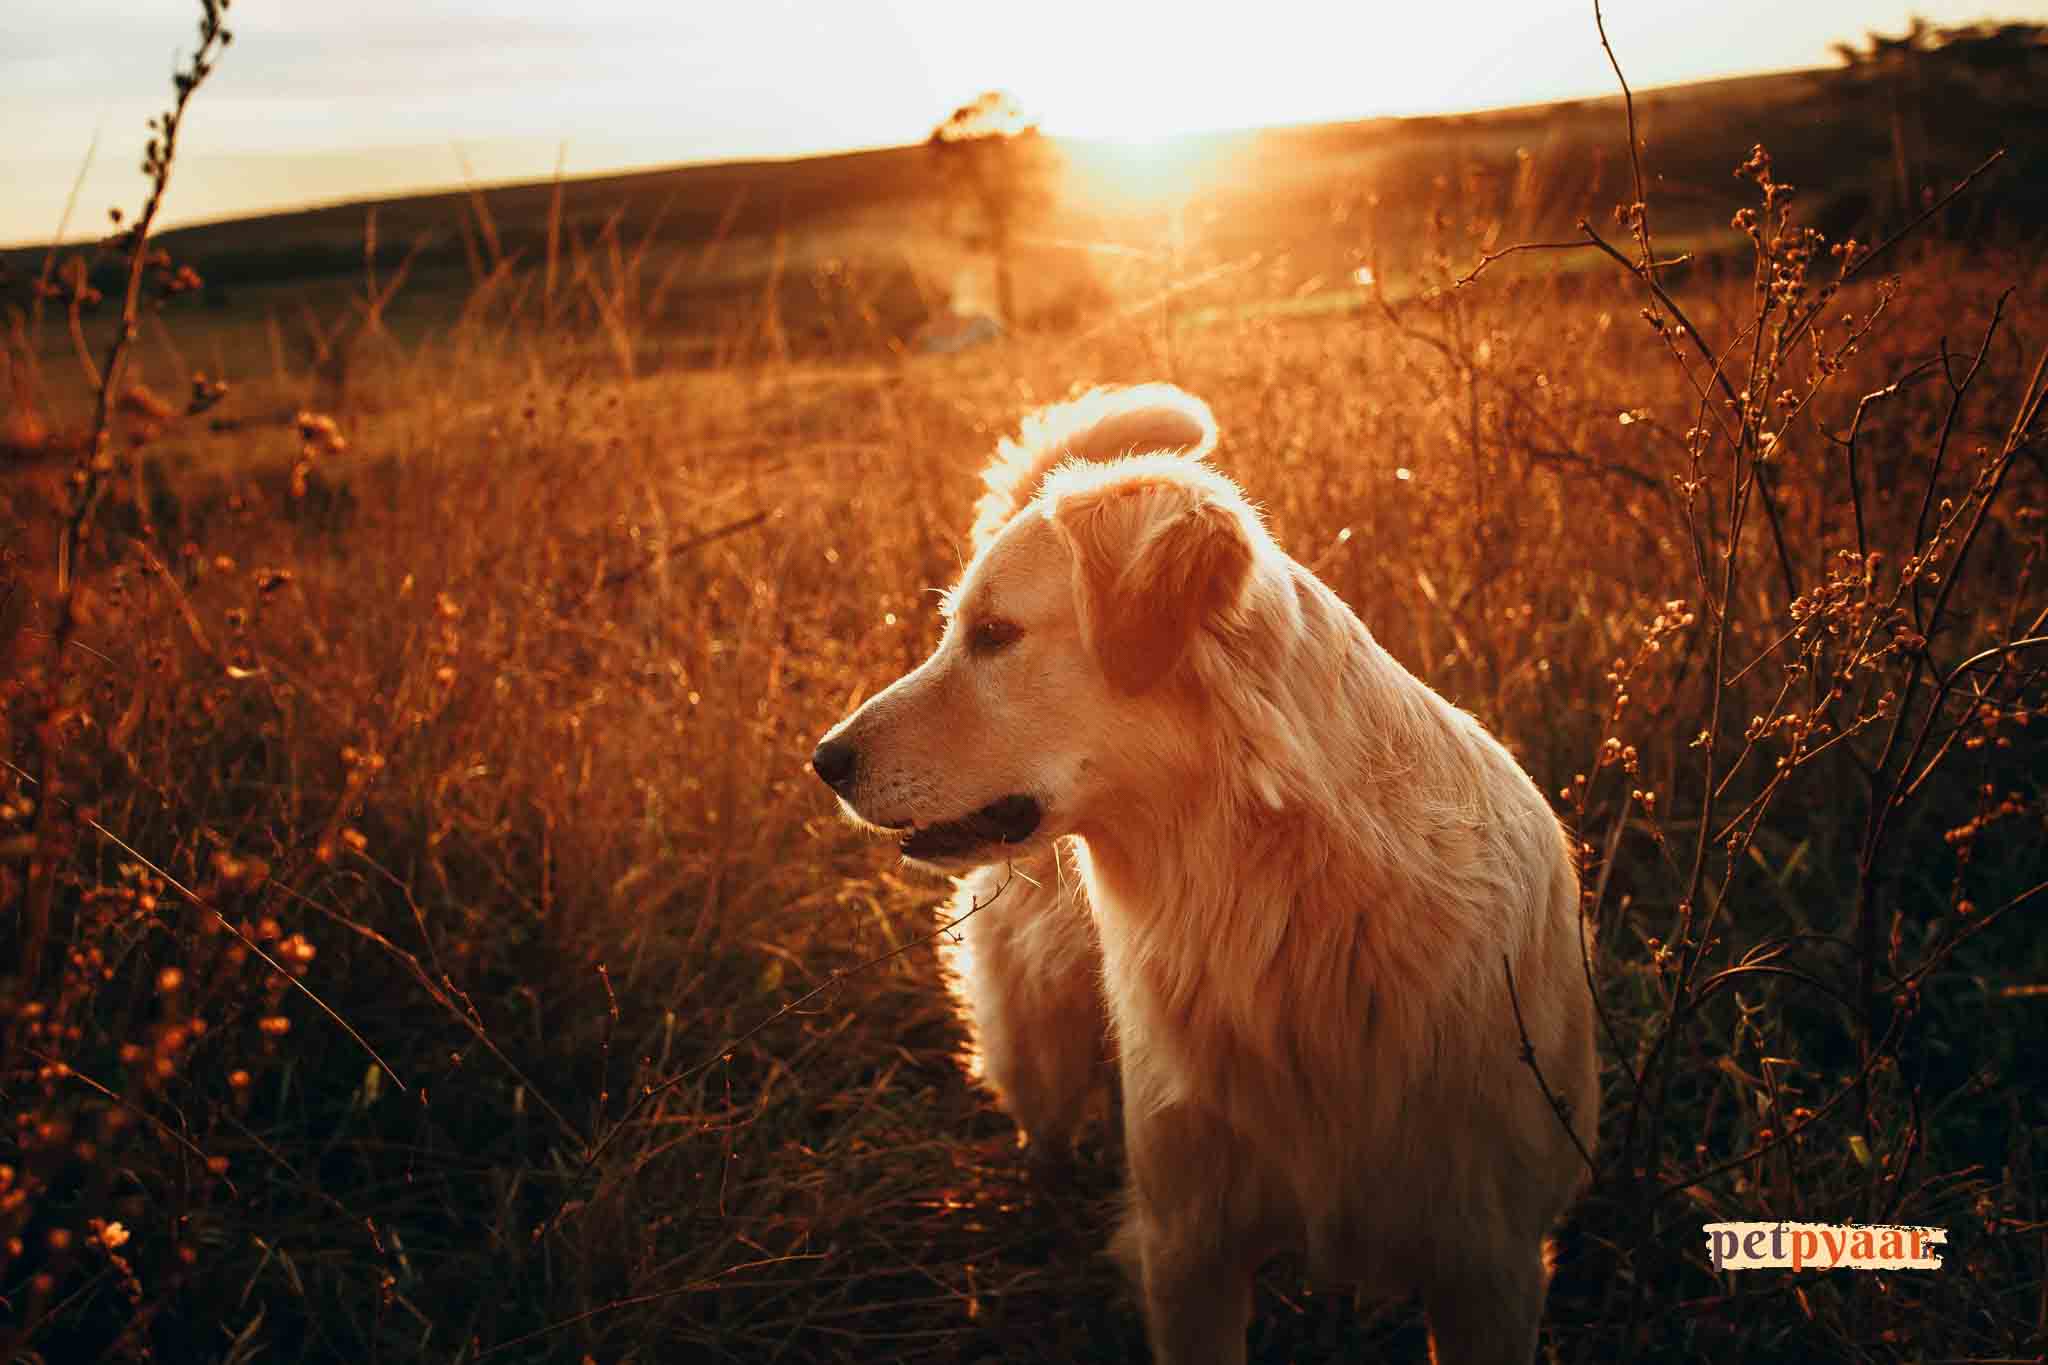 "Debunking Golden Retriever Care Myths in India: Common Misconceptions and Climate Considerations"